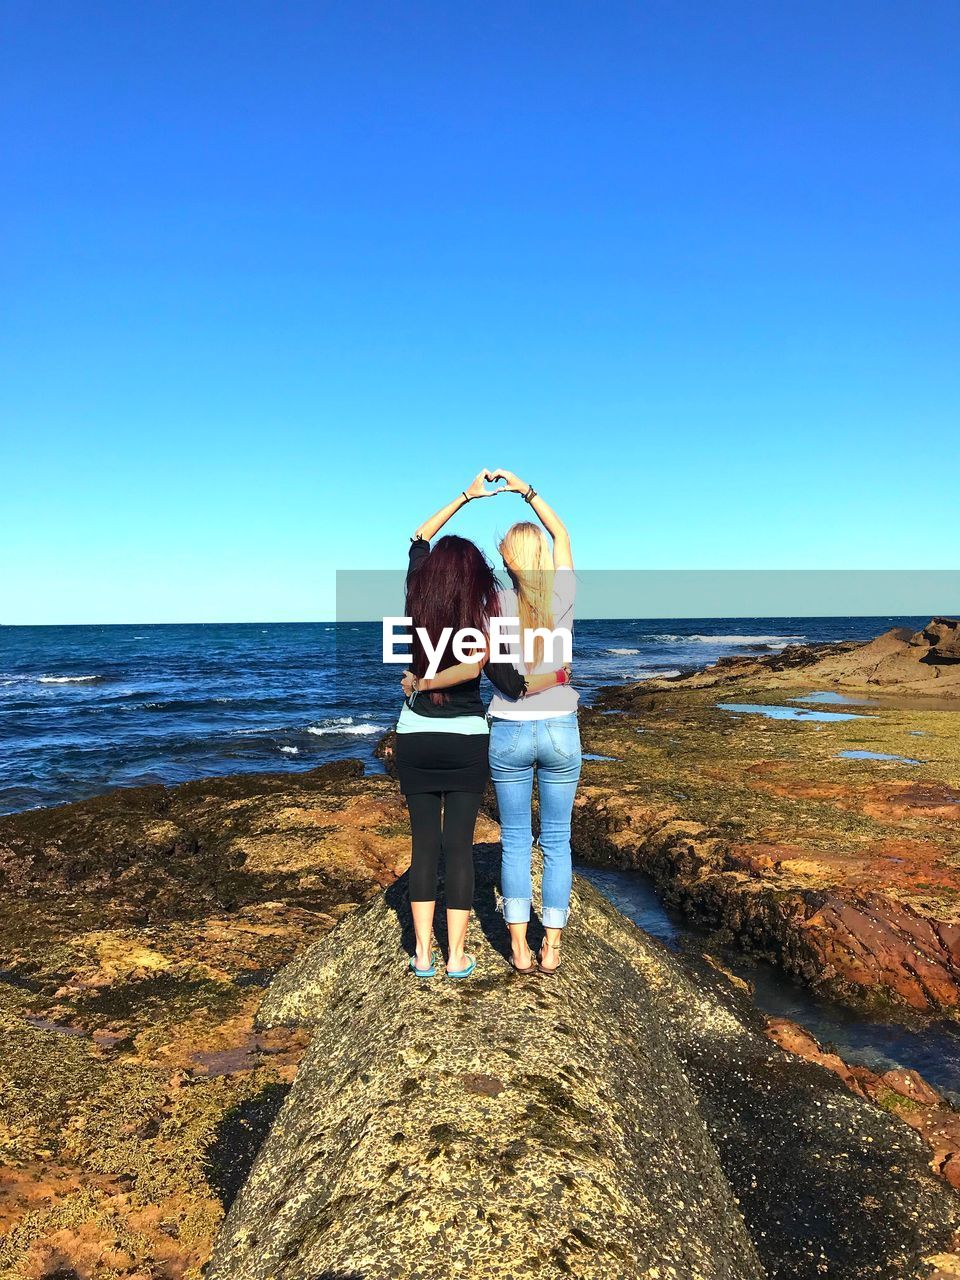 Rear view of women with arms around making heart shape over head while standing on rock at beach against sky